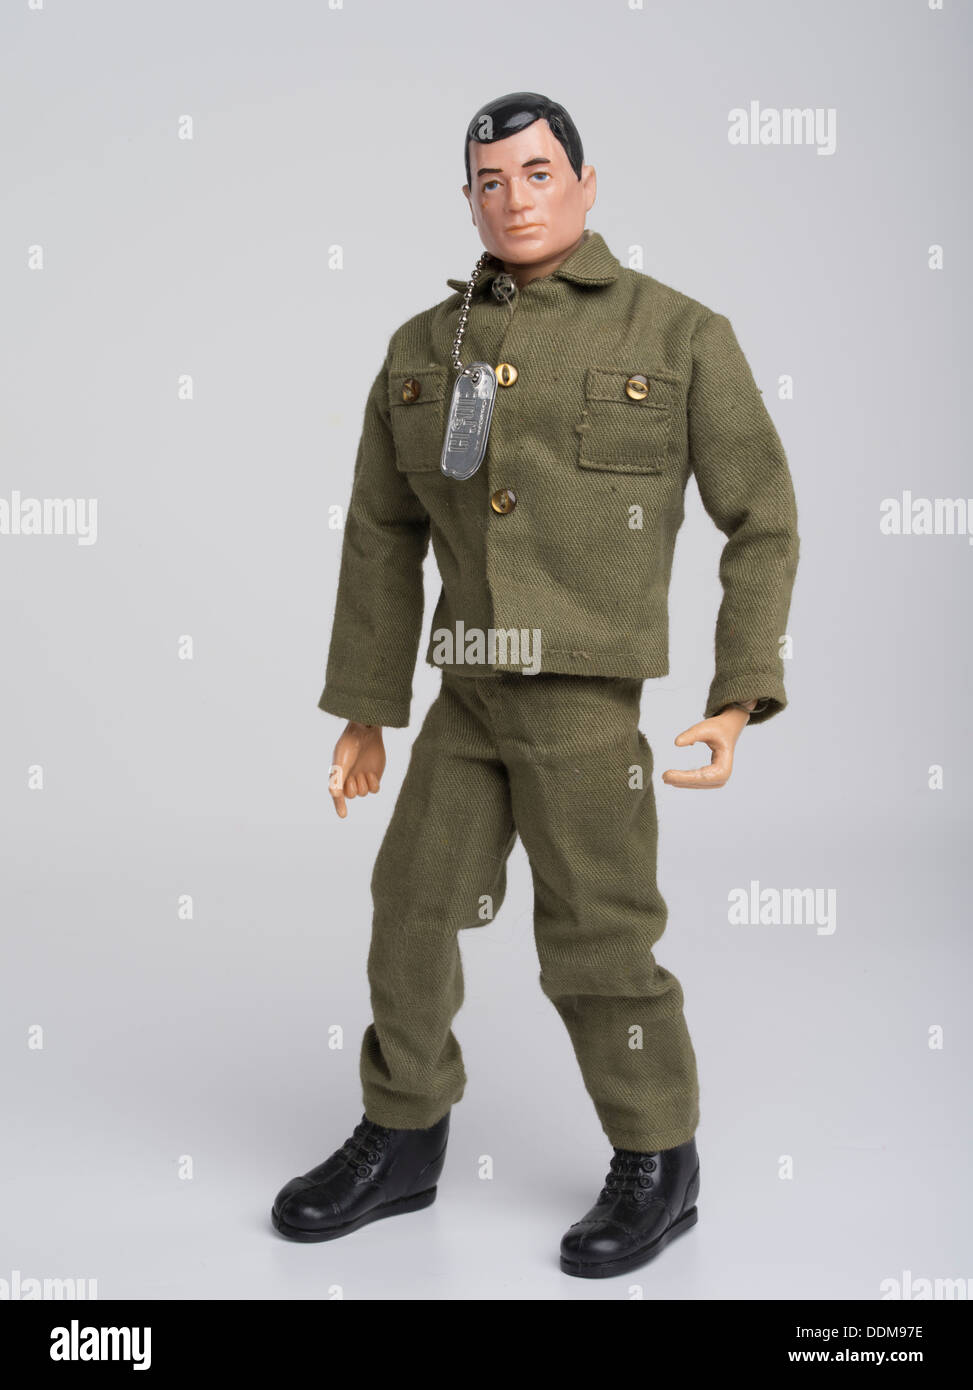 action man 1960s